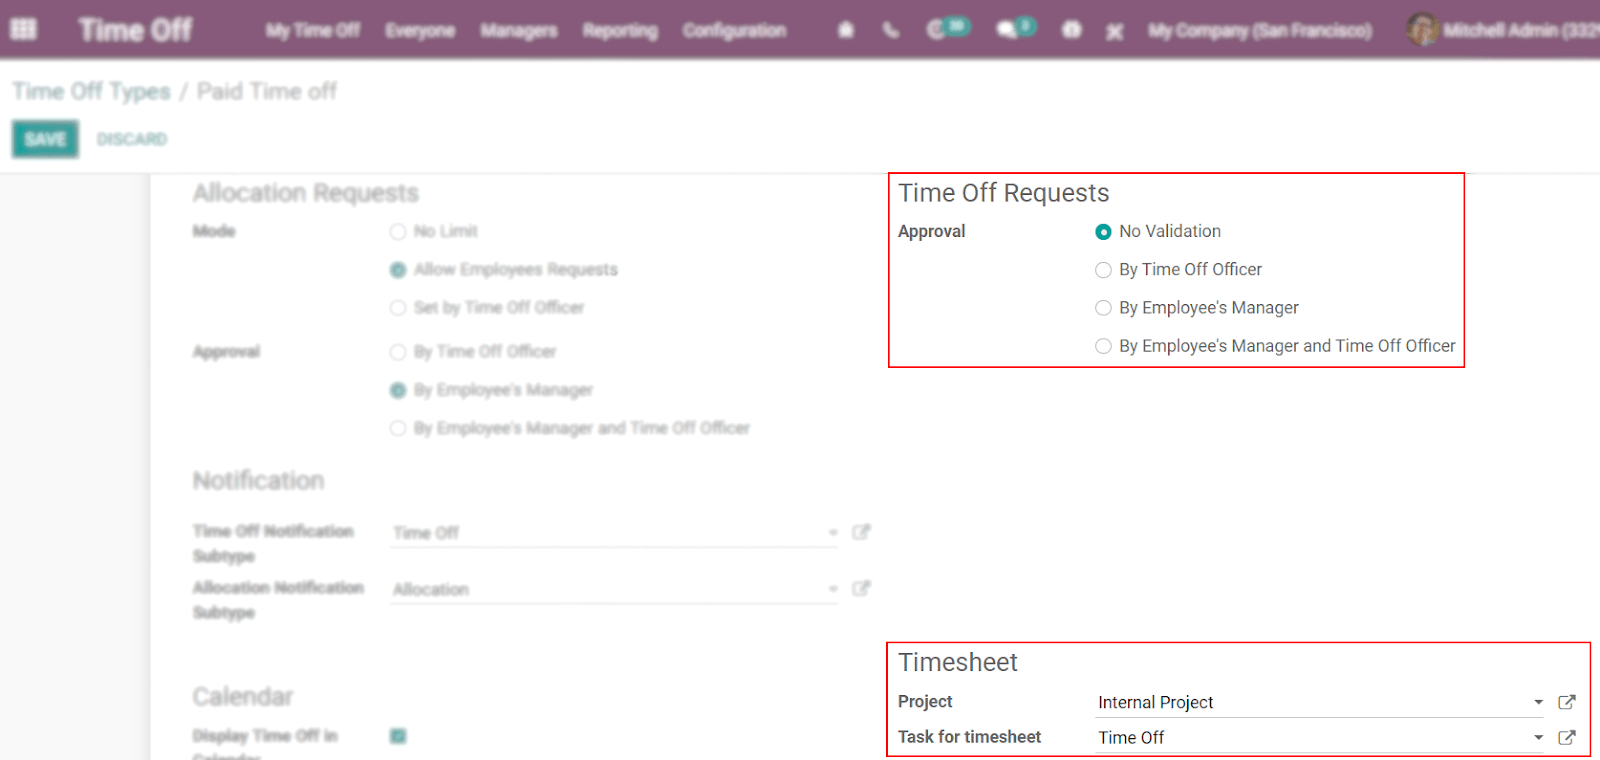 View of a time off types form emphasizing the time off requests and timesheets section in Odoo Time Off